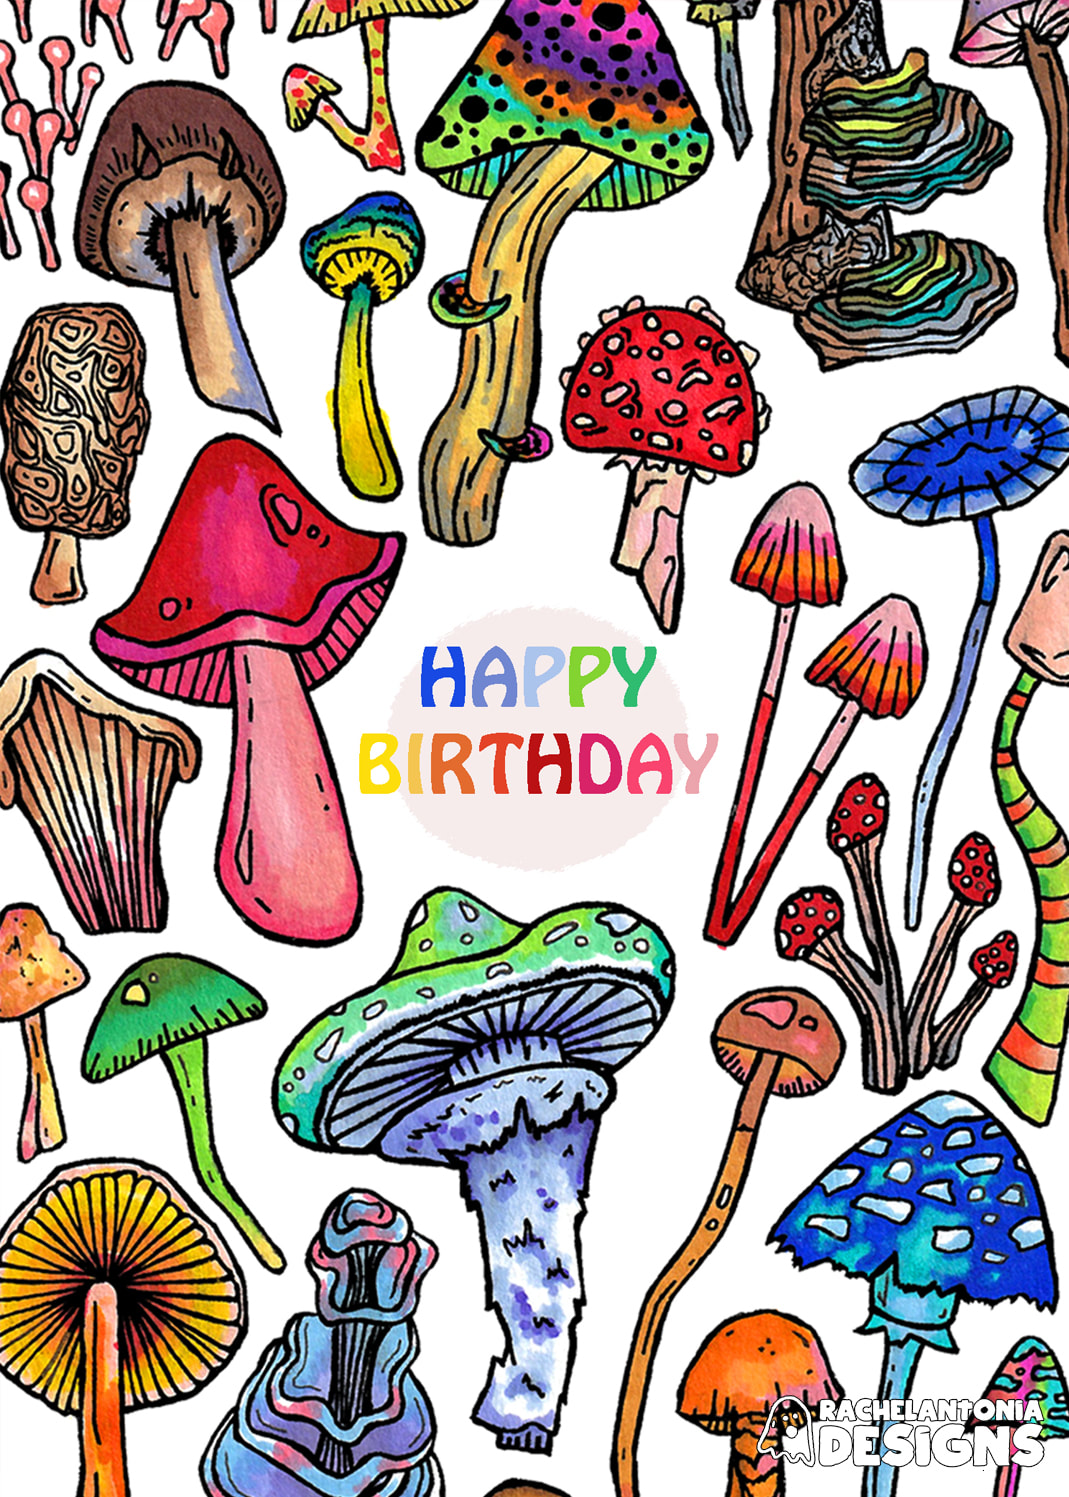 Image of a card that says happy birthday in rainbow font with different types of mushrooms surrounding it